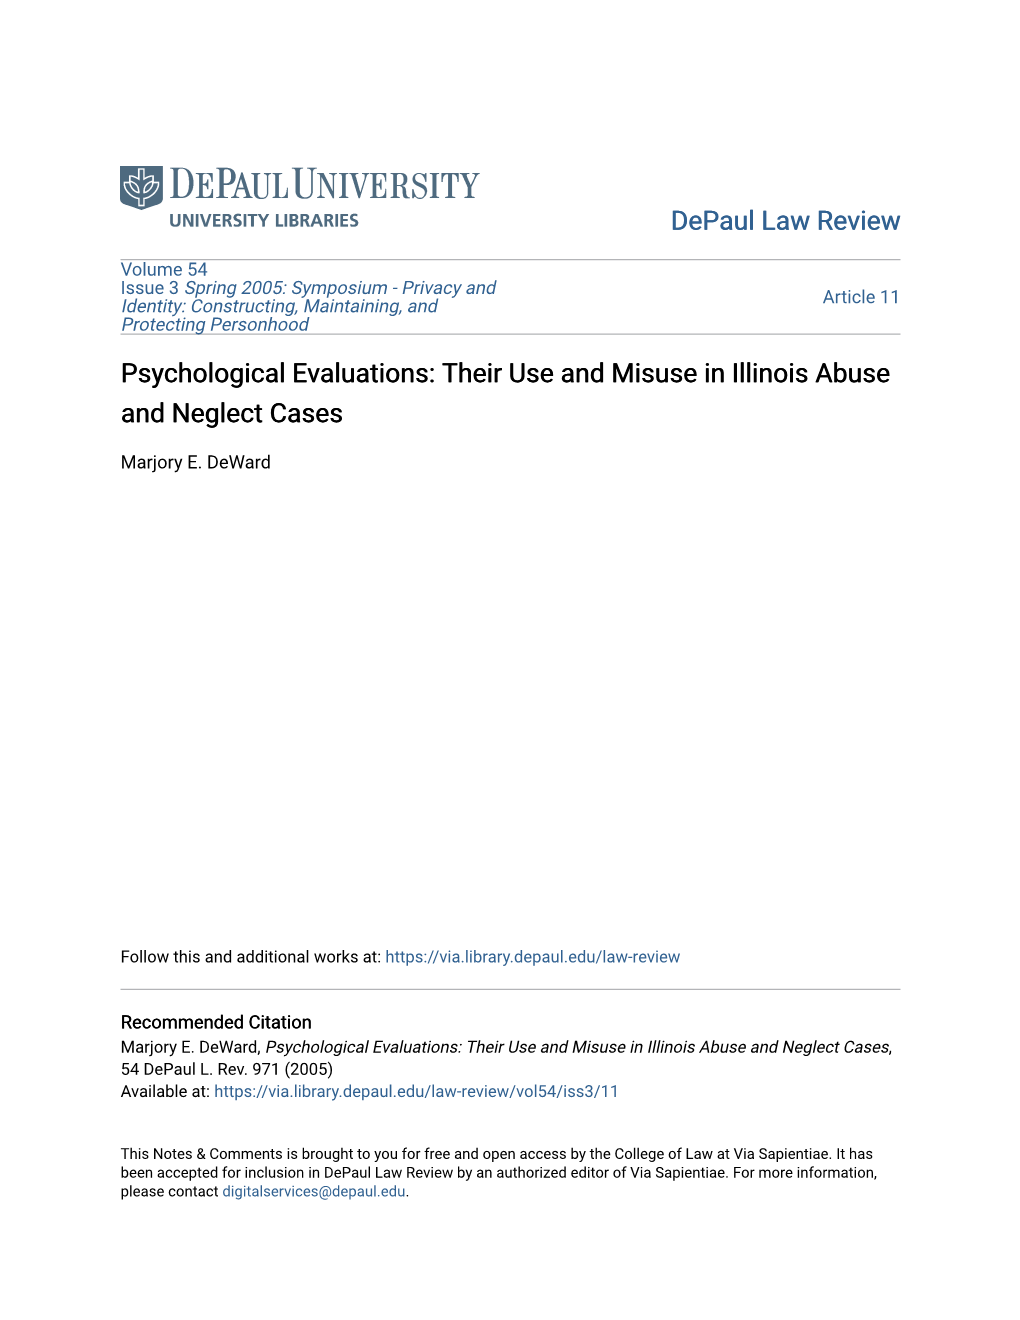 Psychological Evaluations: Their Use and Misuse in Illinois Abuse and Neglect Cases